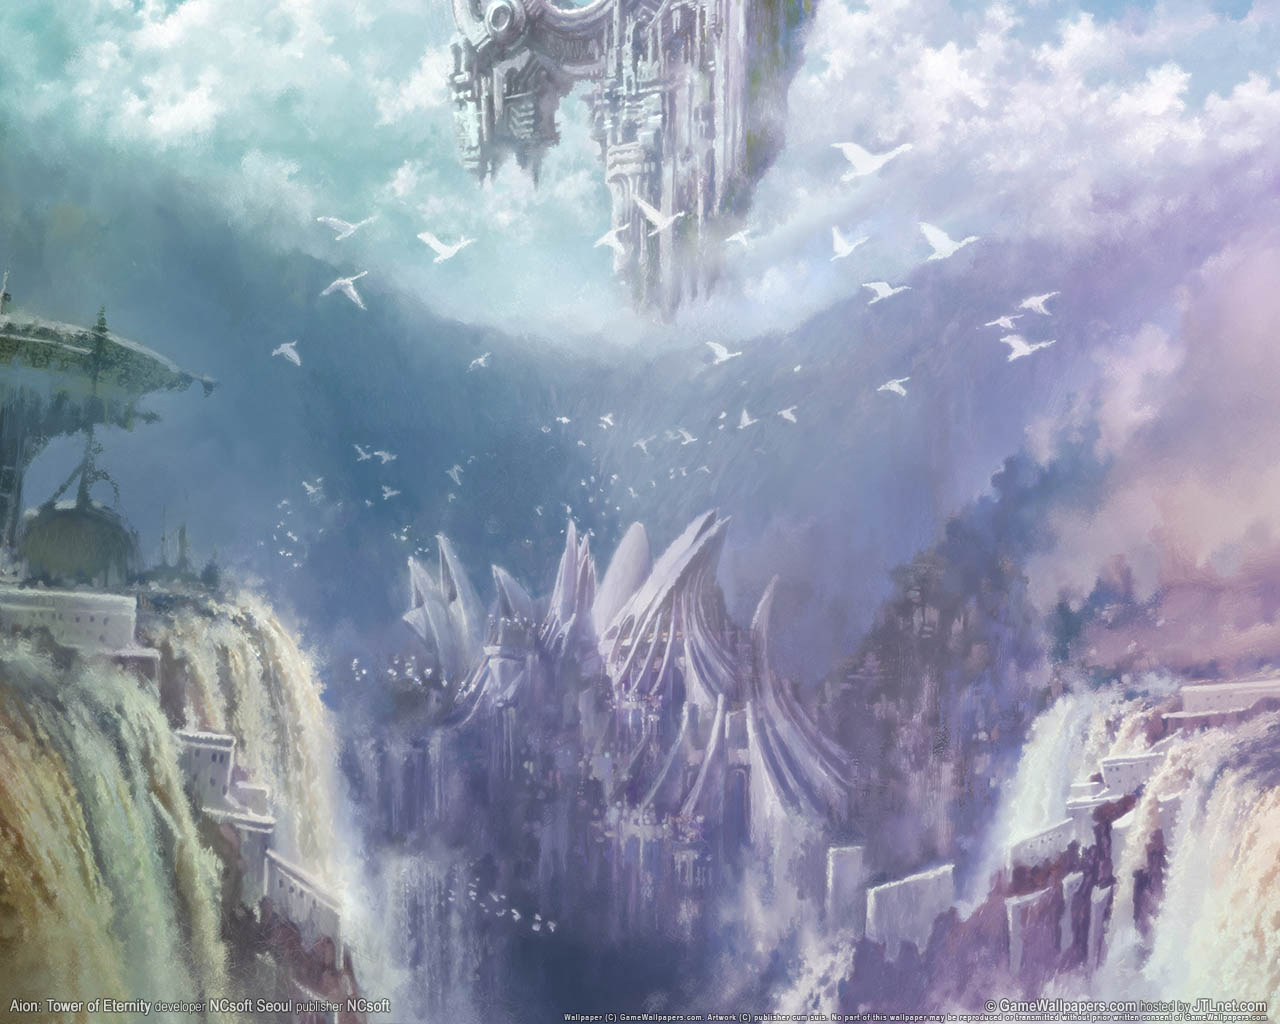 Aion%3A Tower of Eternity achtergrond 07 1280x1024